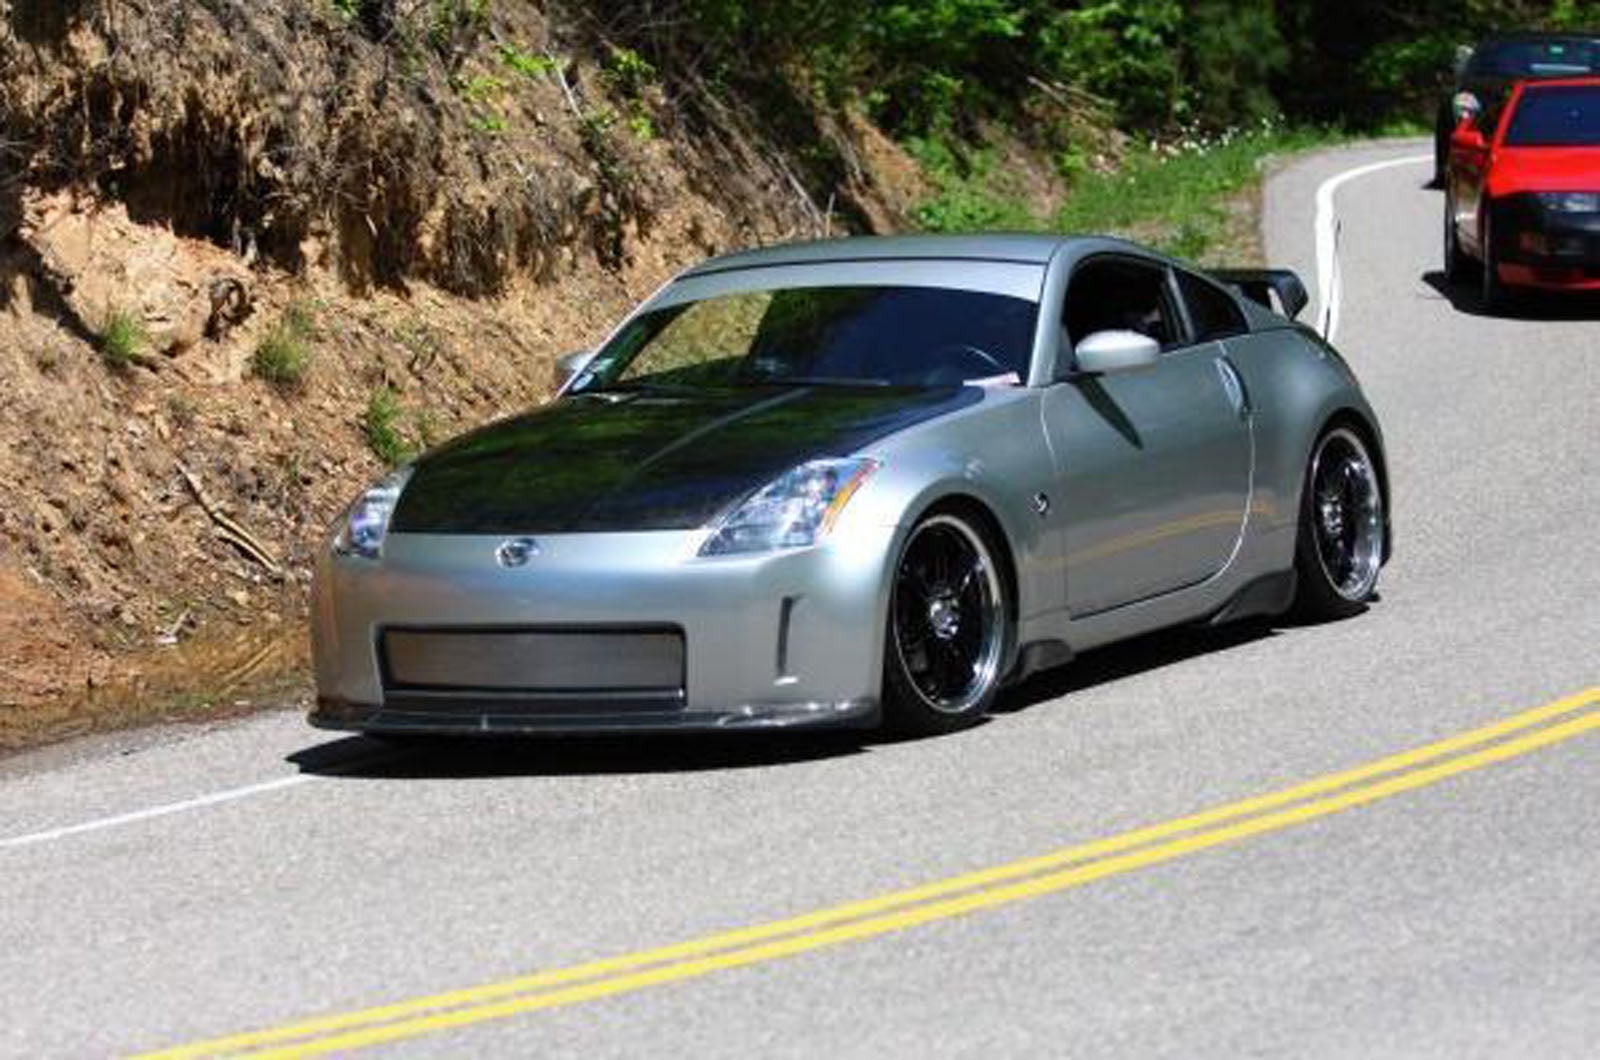 Modified nissan 350z for sale uk